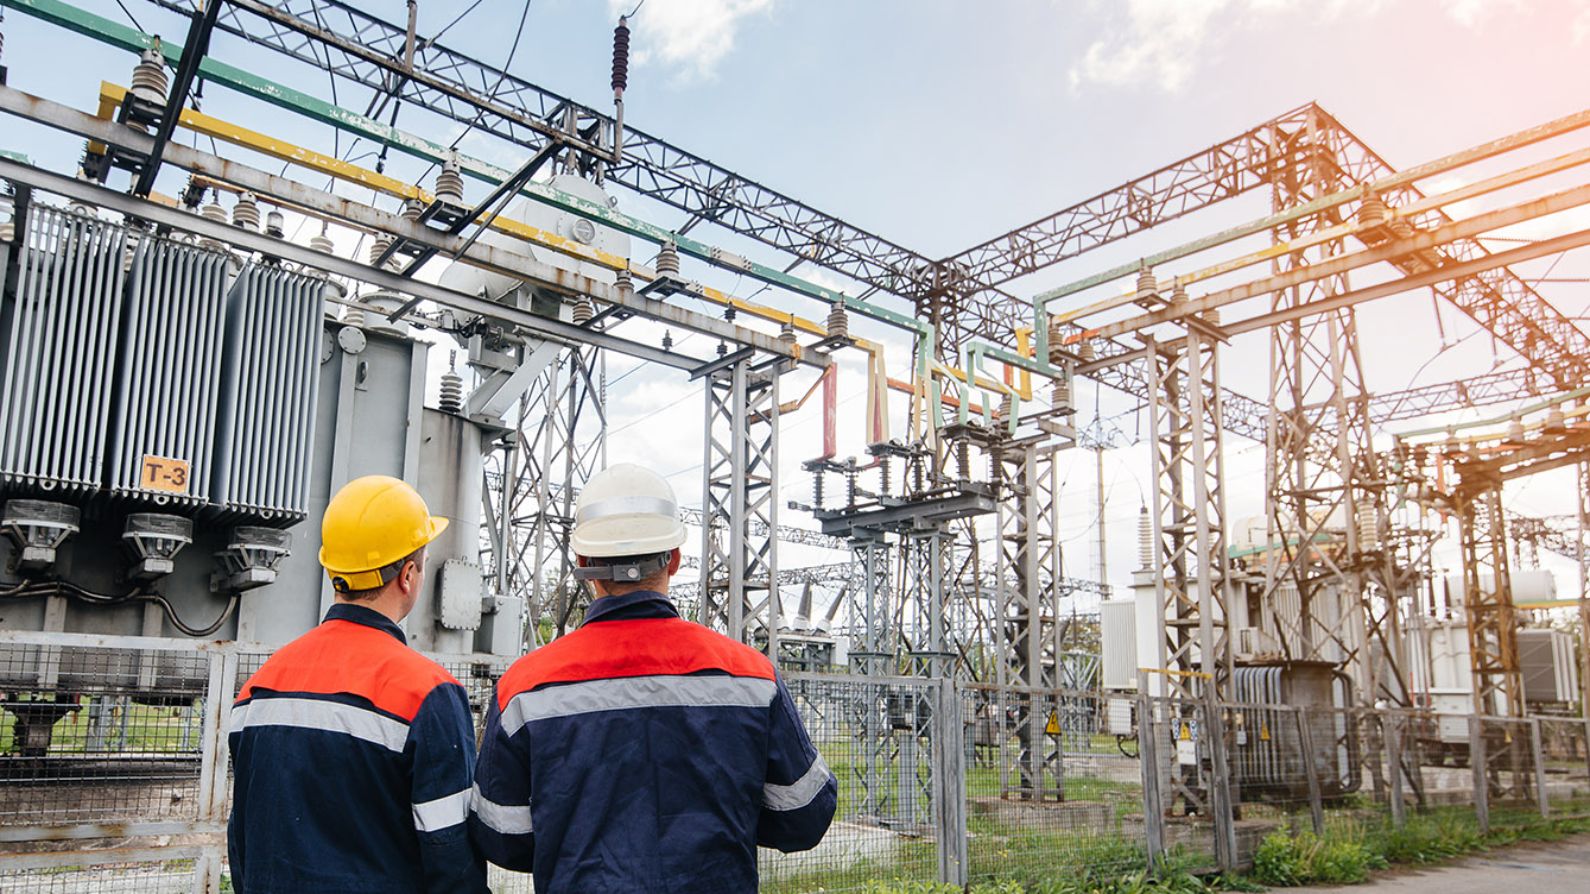 Electricians in front of a substation